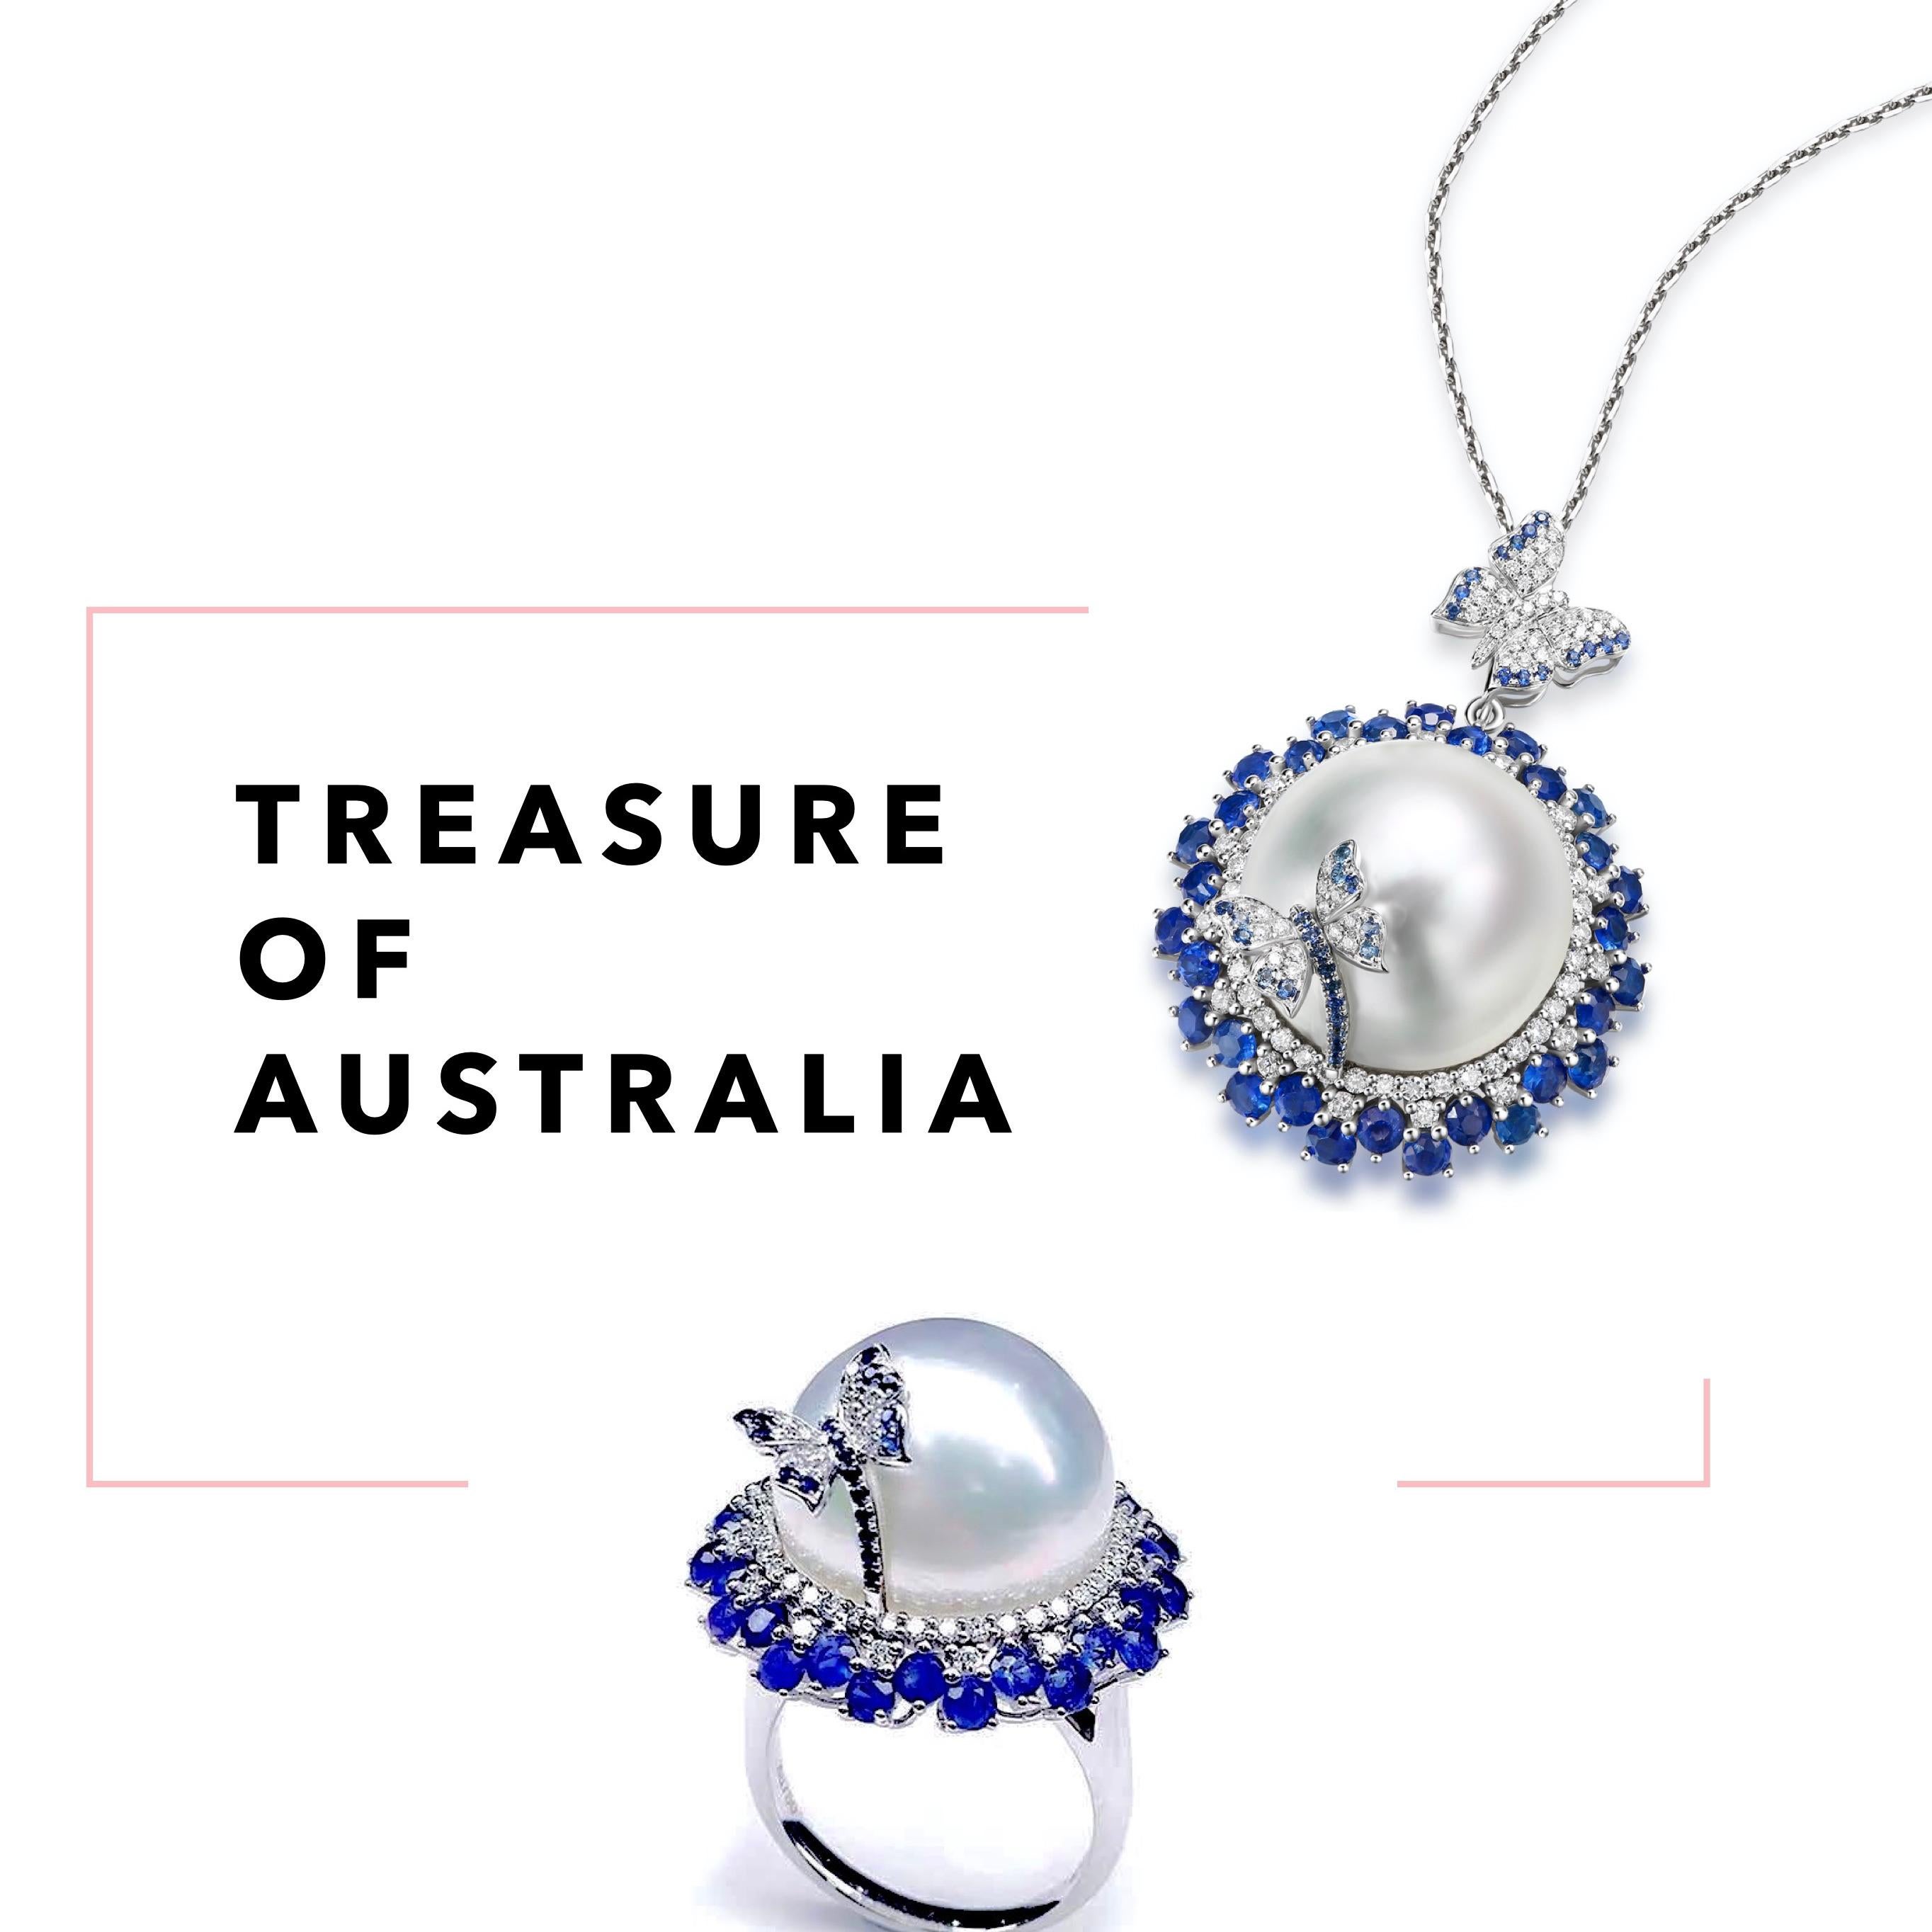 The design is inspired by butterfly resting on top of a flower. The massive 16.7 mm White Australian South Sea Pearl is surrounded by vivid blue sapphire pave. On top the the pearl is a butterfly encrusted in vivid blue sapphire and diamonds. The